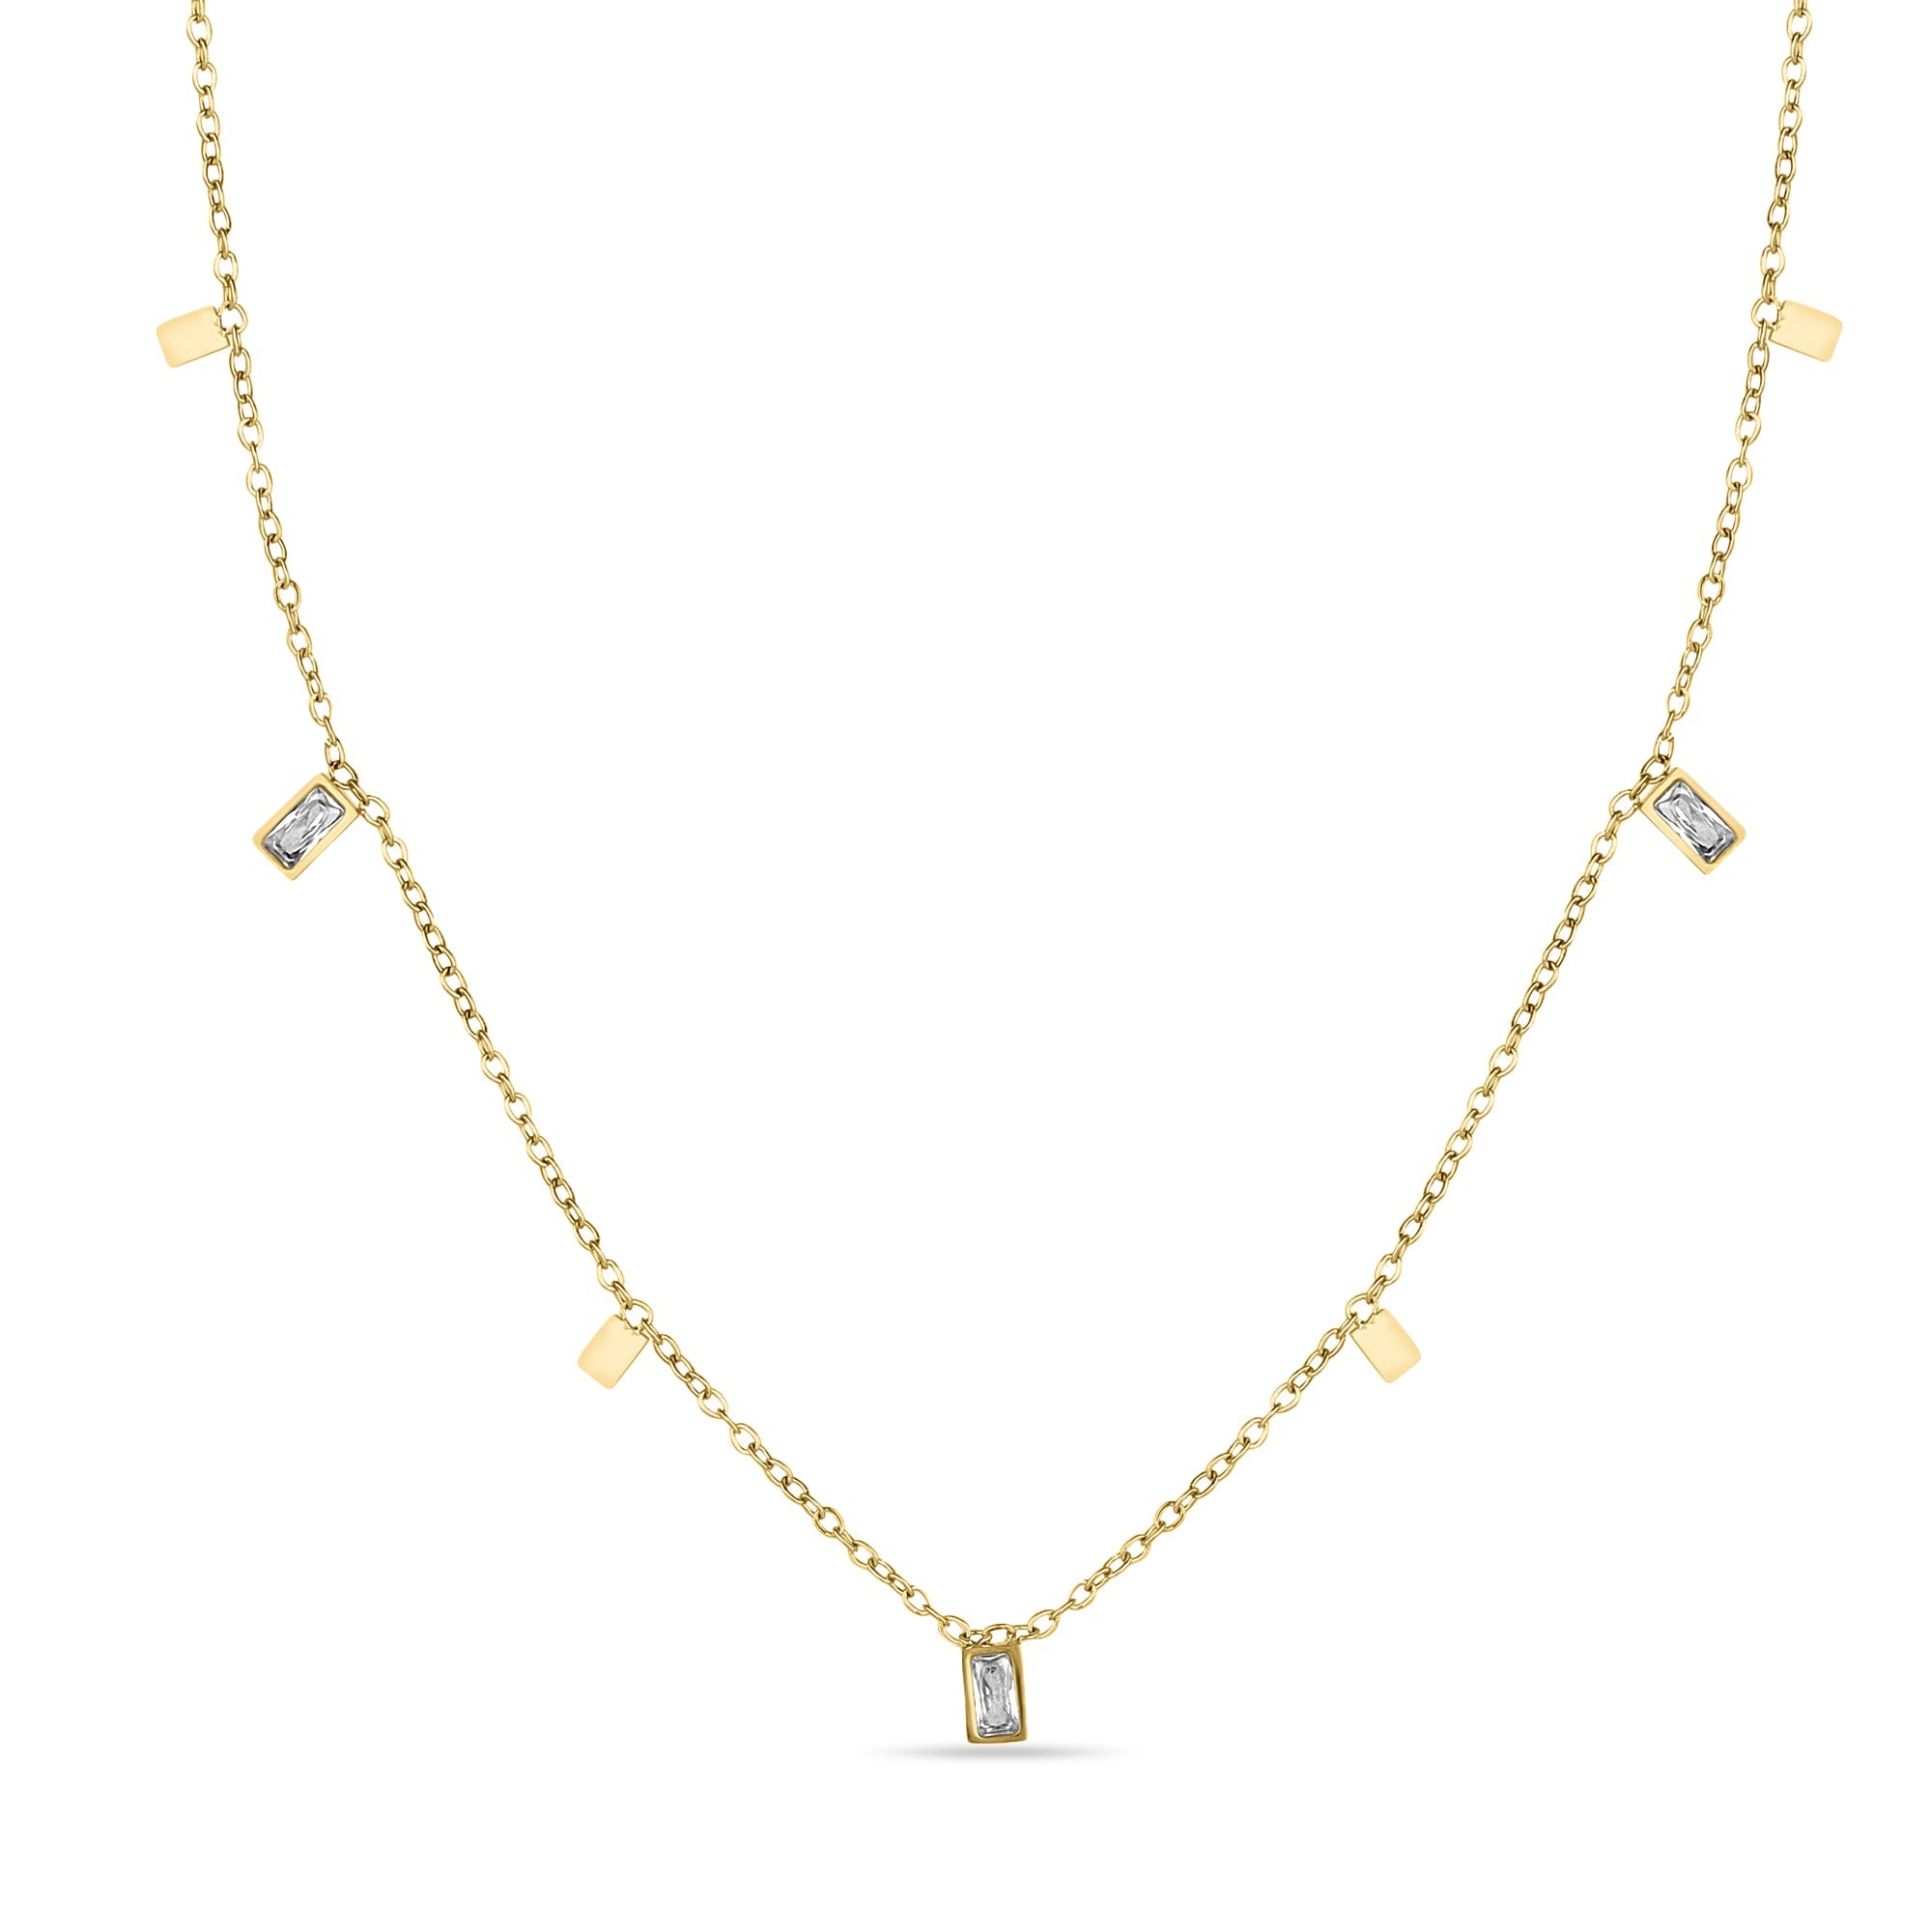 Geometric Edge Necklace - Fab Couture